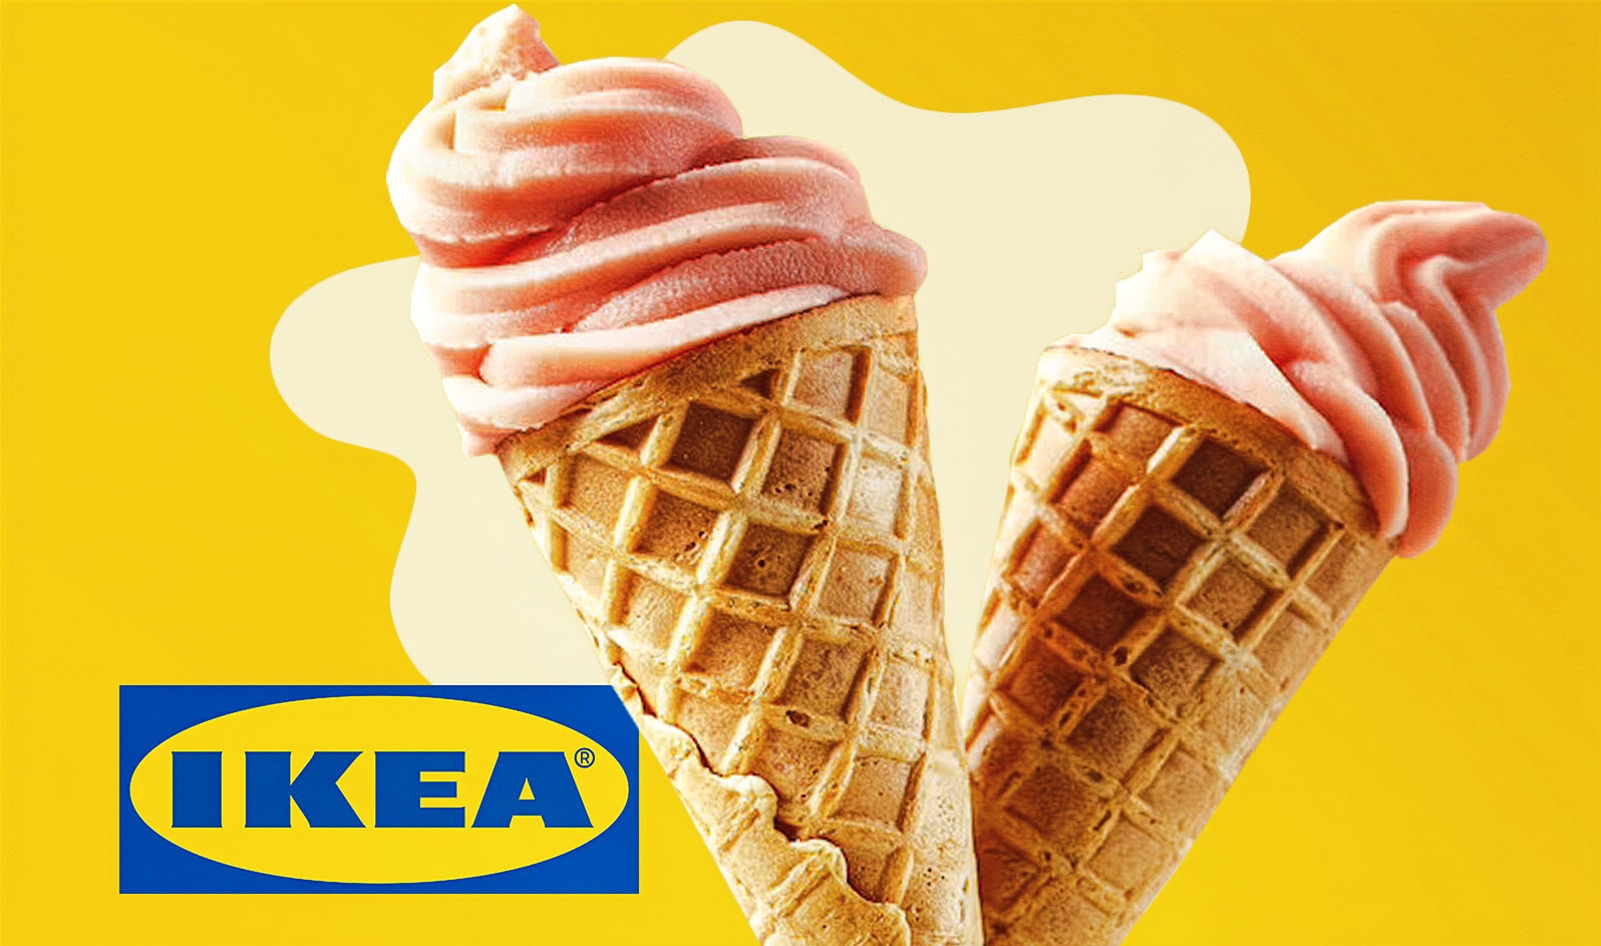 IKEA Looks to "Remove or Replace" Dairy to Meet 2030 Sustainability Goals